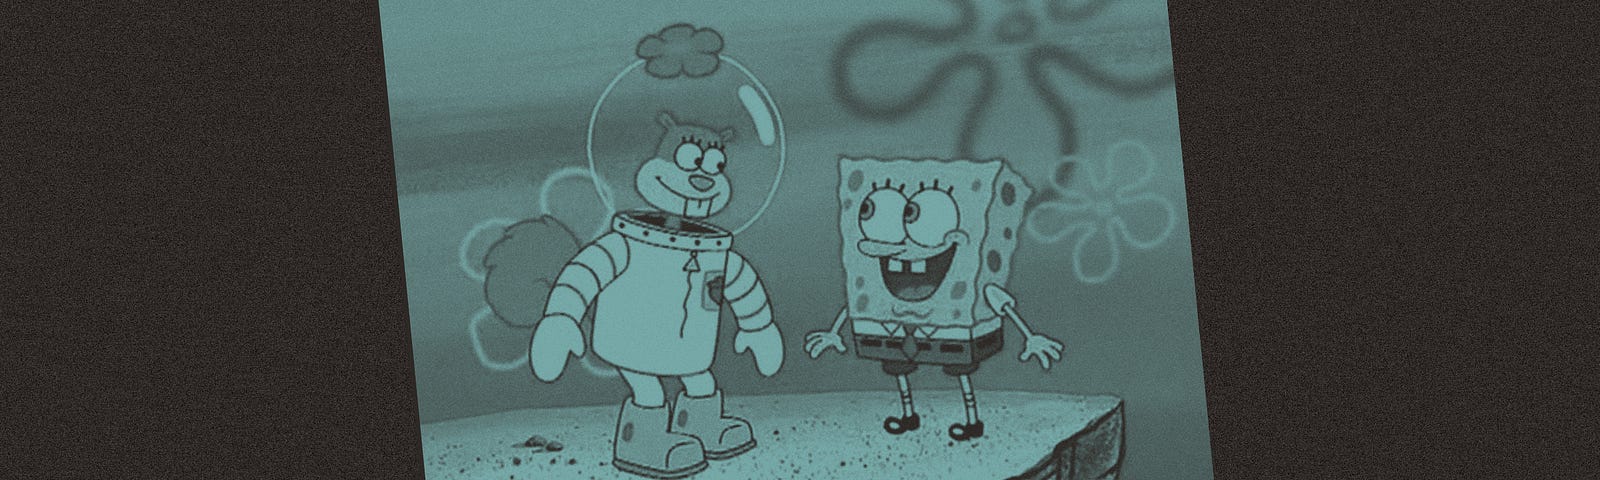 A photo treatment of a screenshot of Spongebob and Sandy from the TV show.